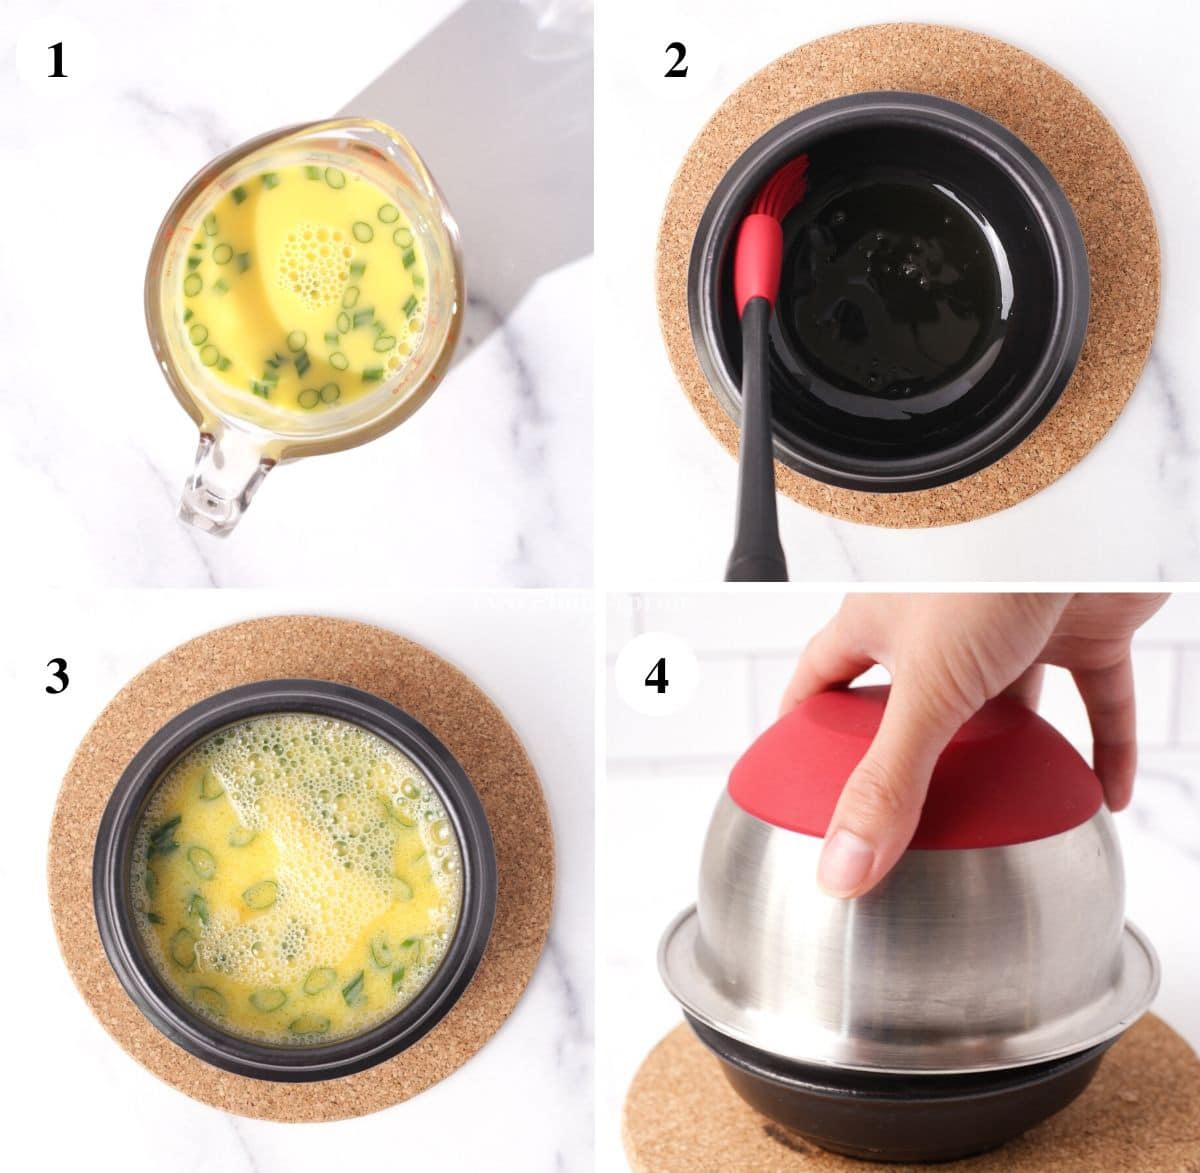 Step by step of how to make Korean steamed egg in an earthenware bowl.